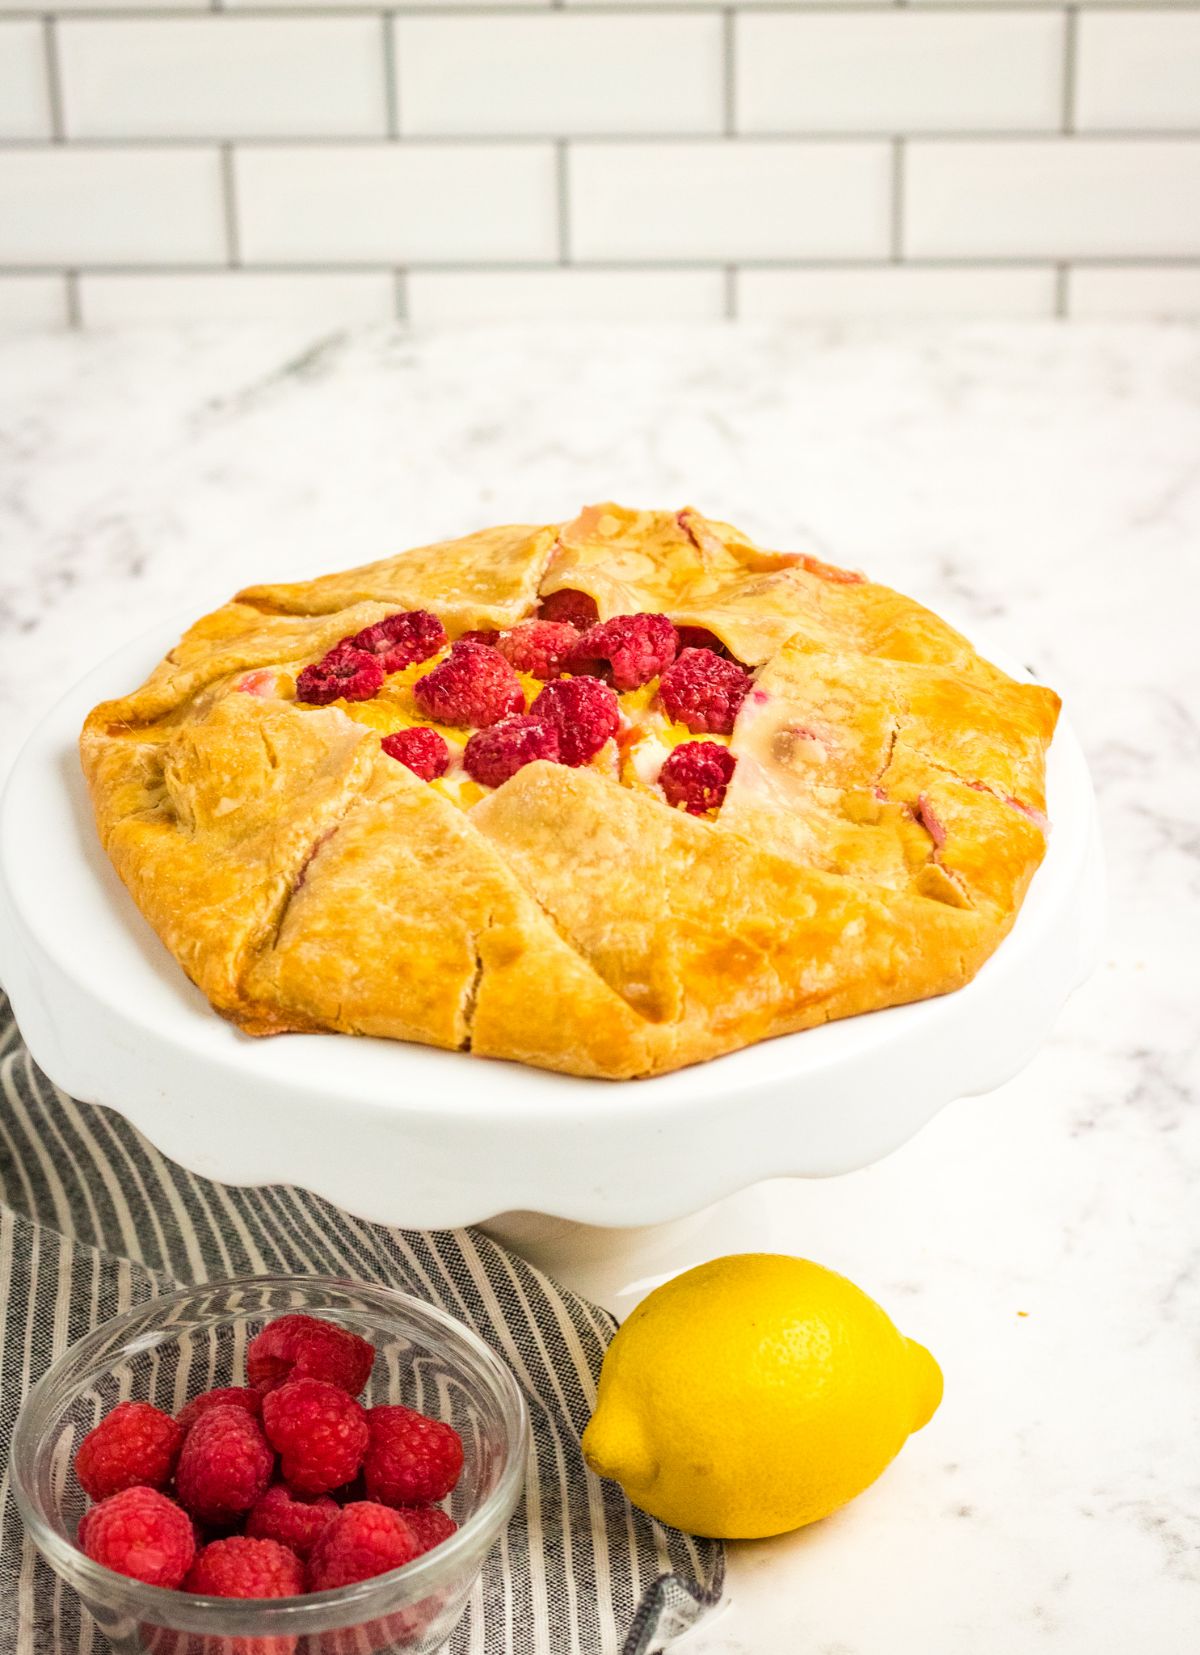 Raspberry Cream Cheese Galette on a white cake stand next to a striped cloth, a lemon and raspberries in a glass bowl